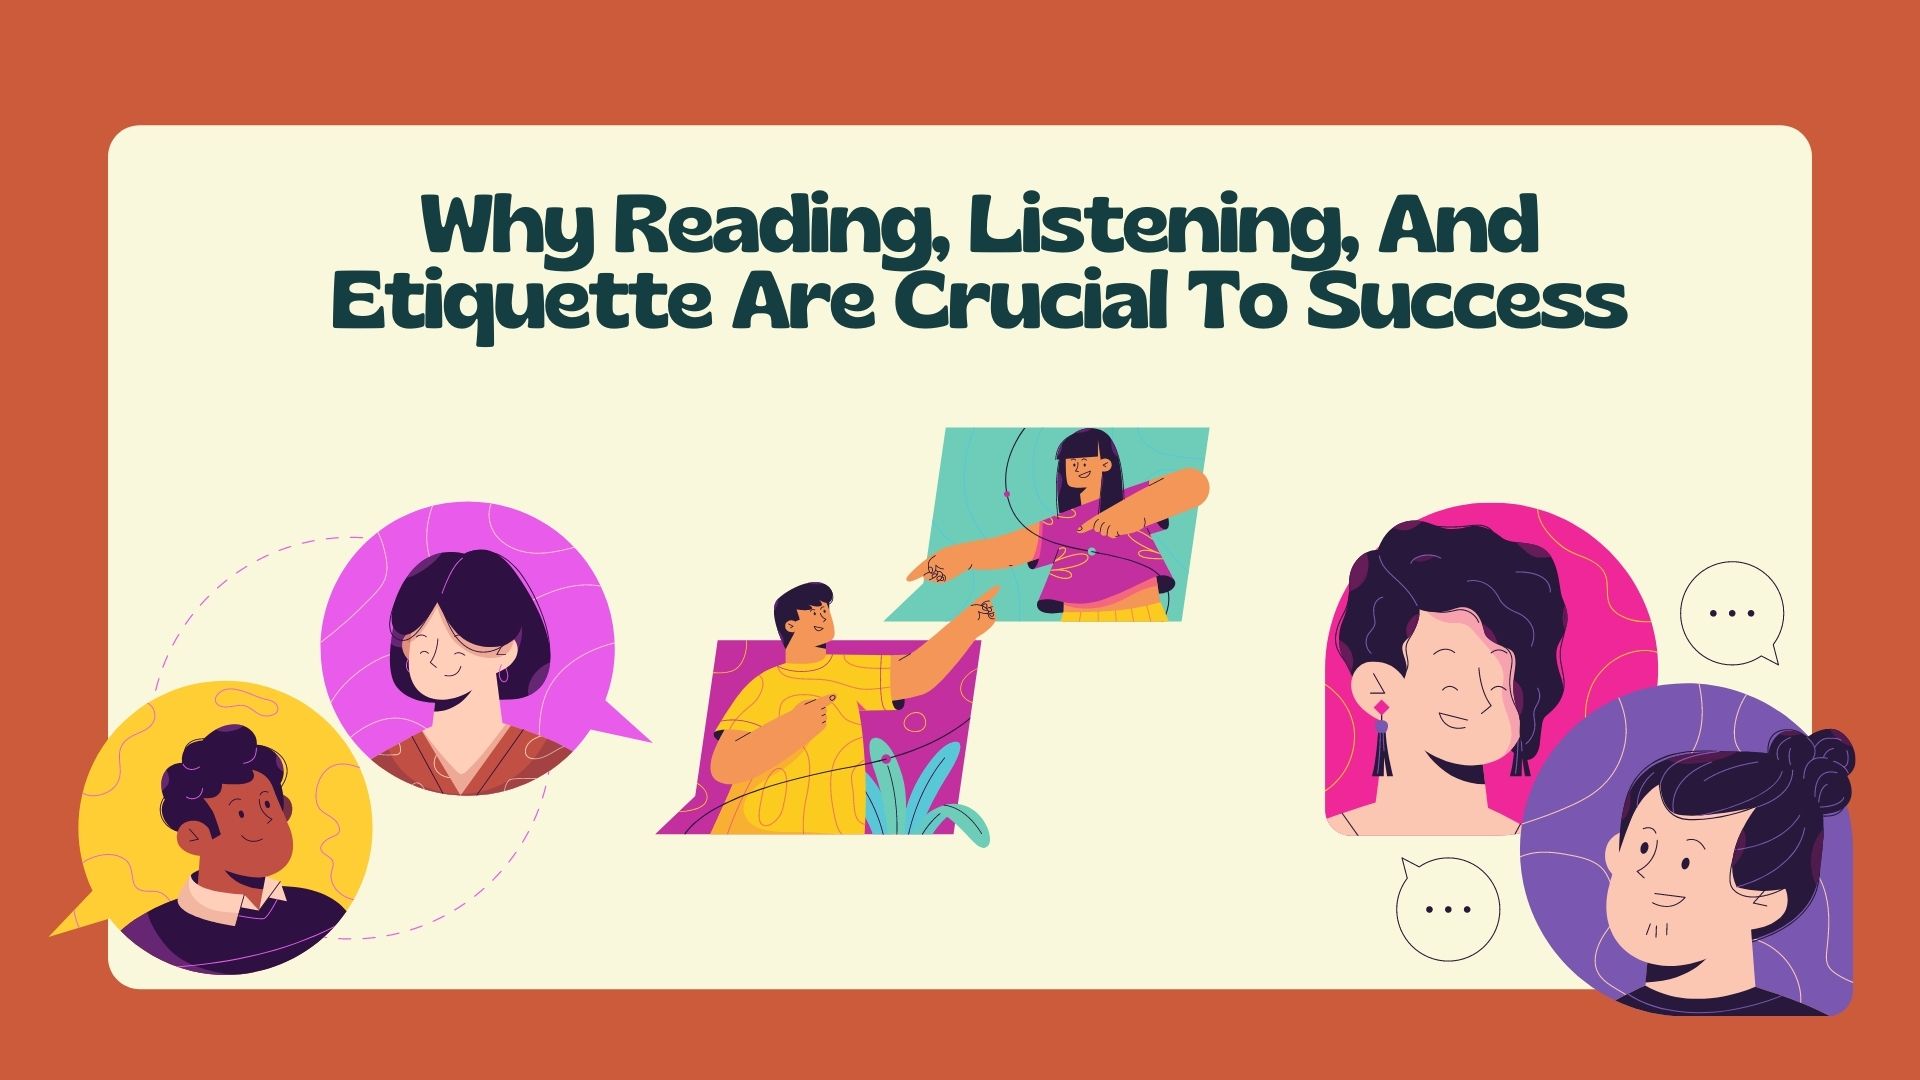 Why Reading, Listening, And Etiquette Are Crucial To Success